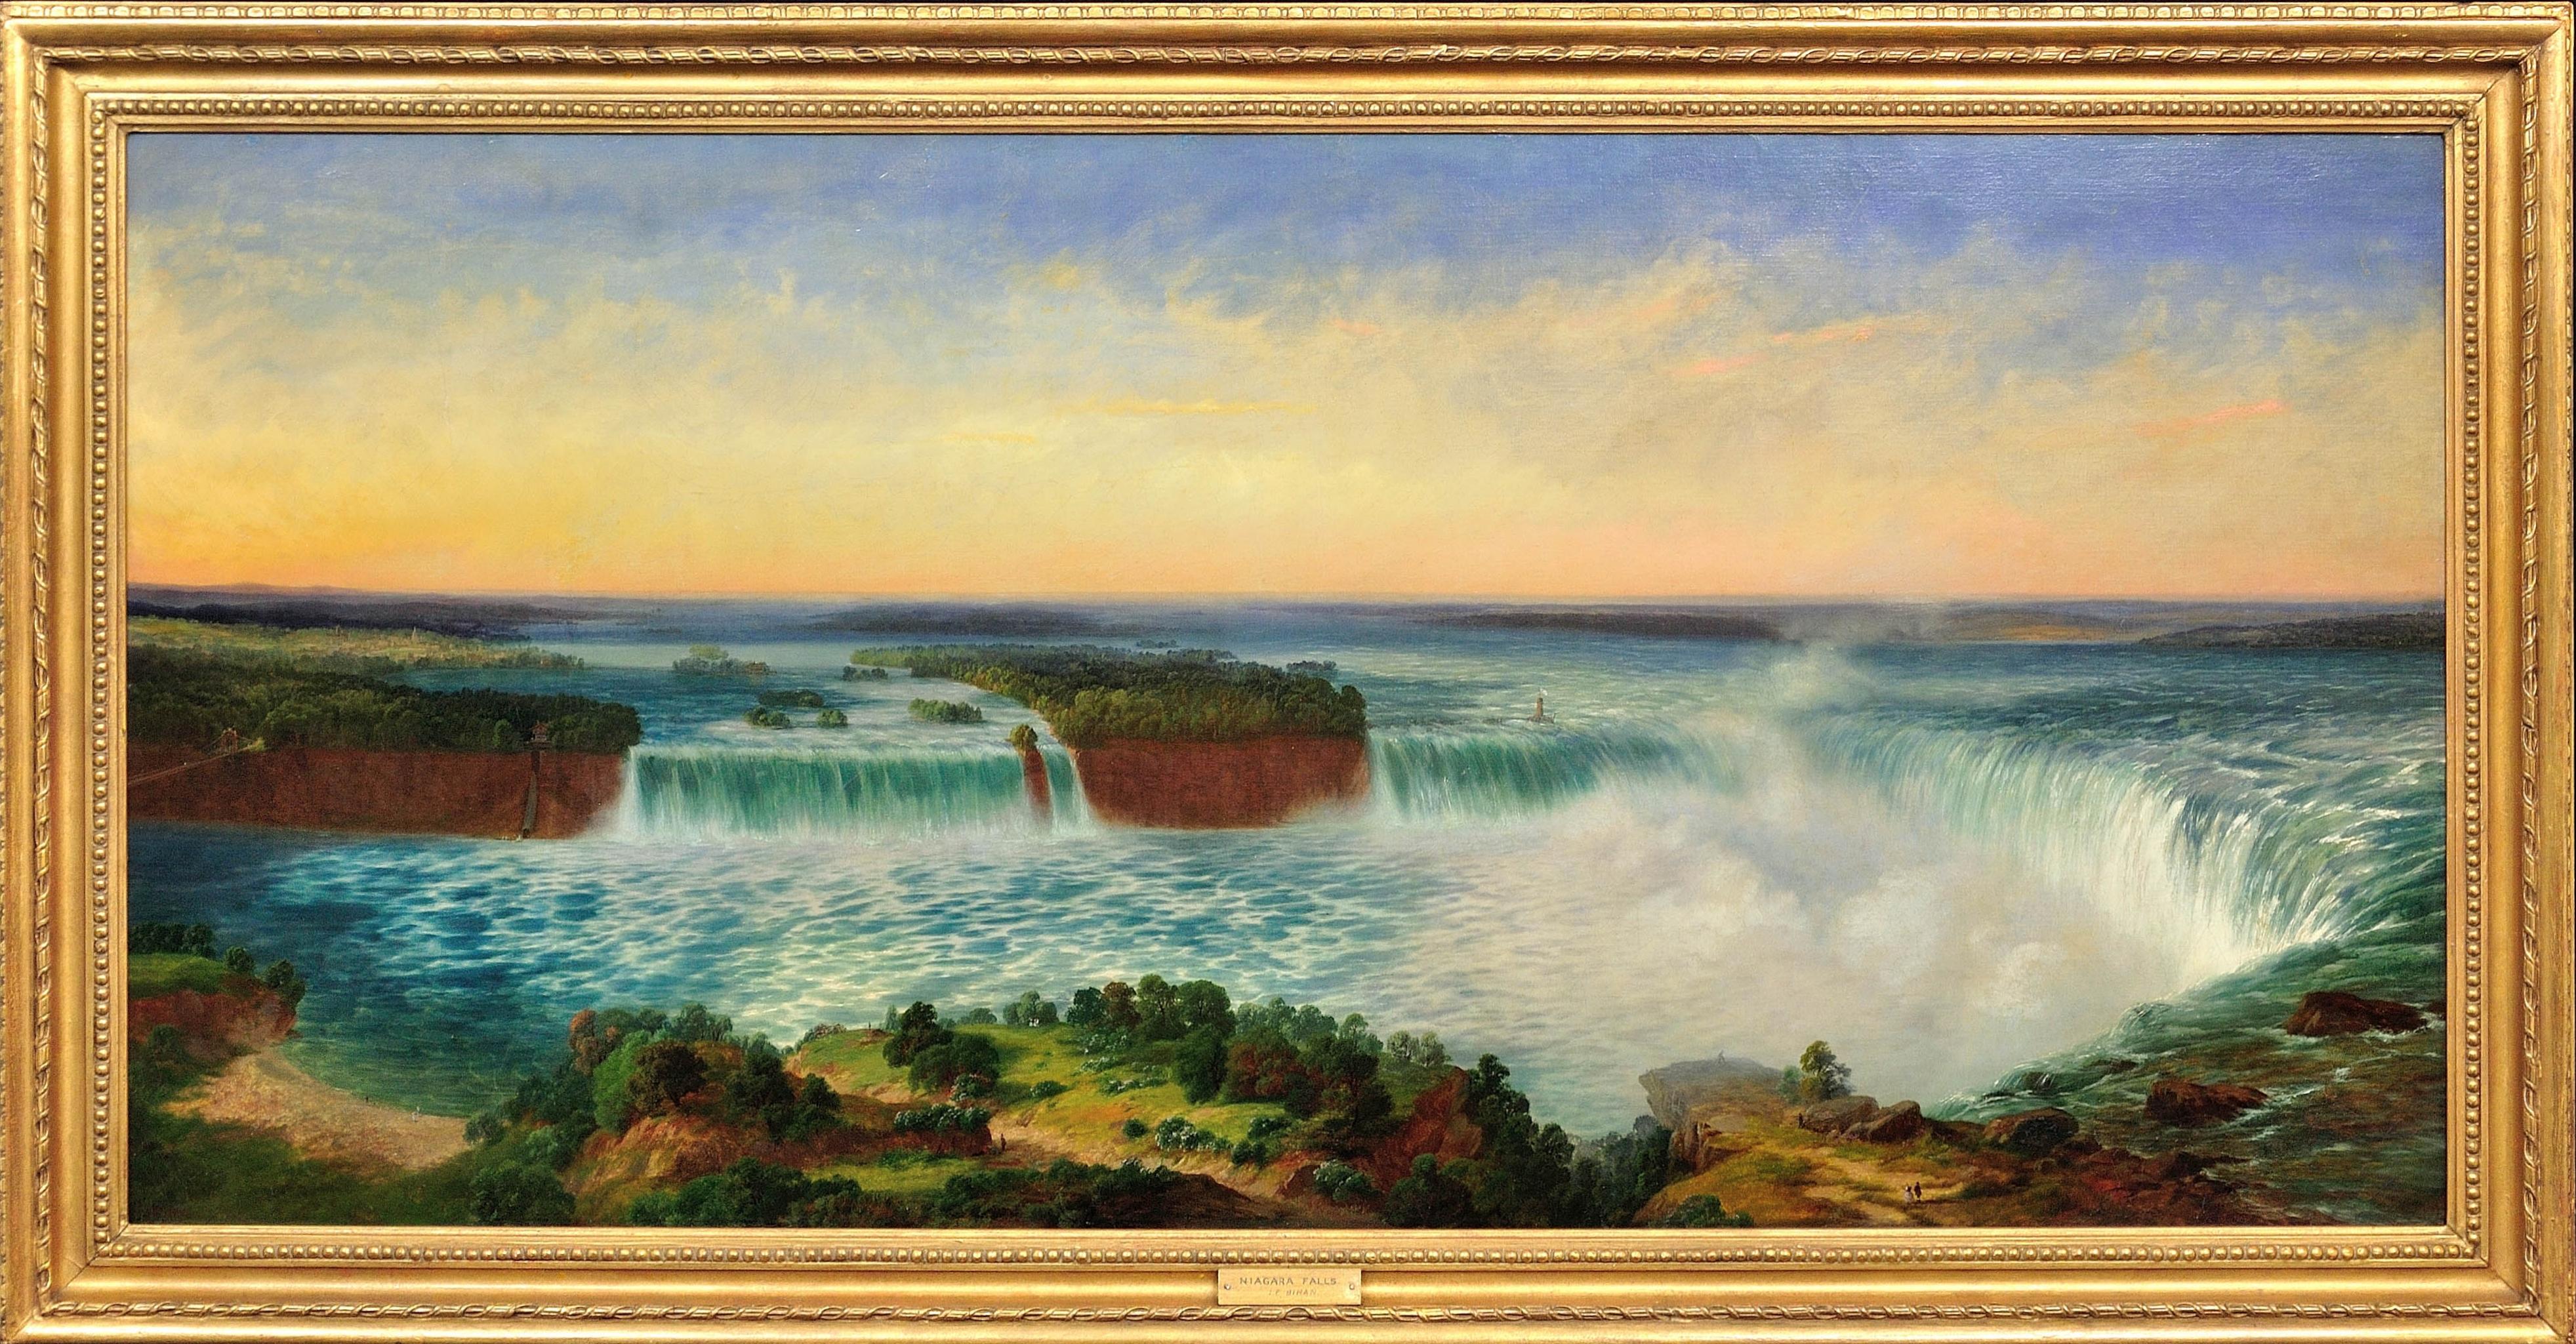 Alexandre Le Bihan Landscape Painting - Niagara Falls, Ontario. View Across to New York State. Buffalo NY in Distance. 